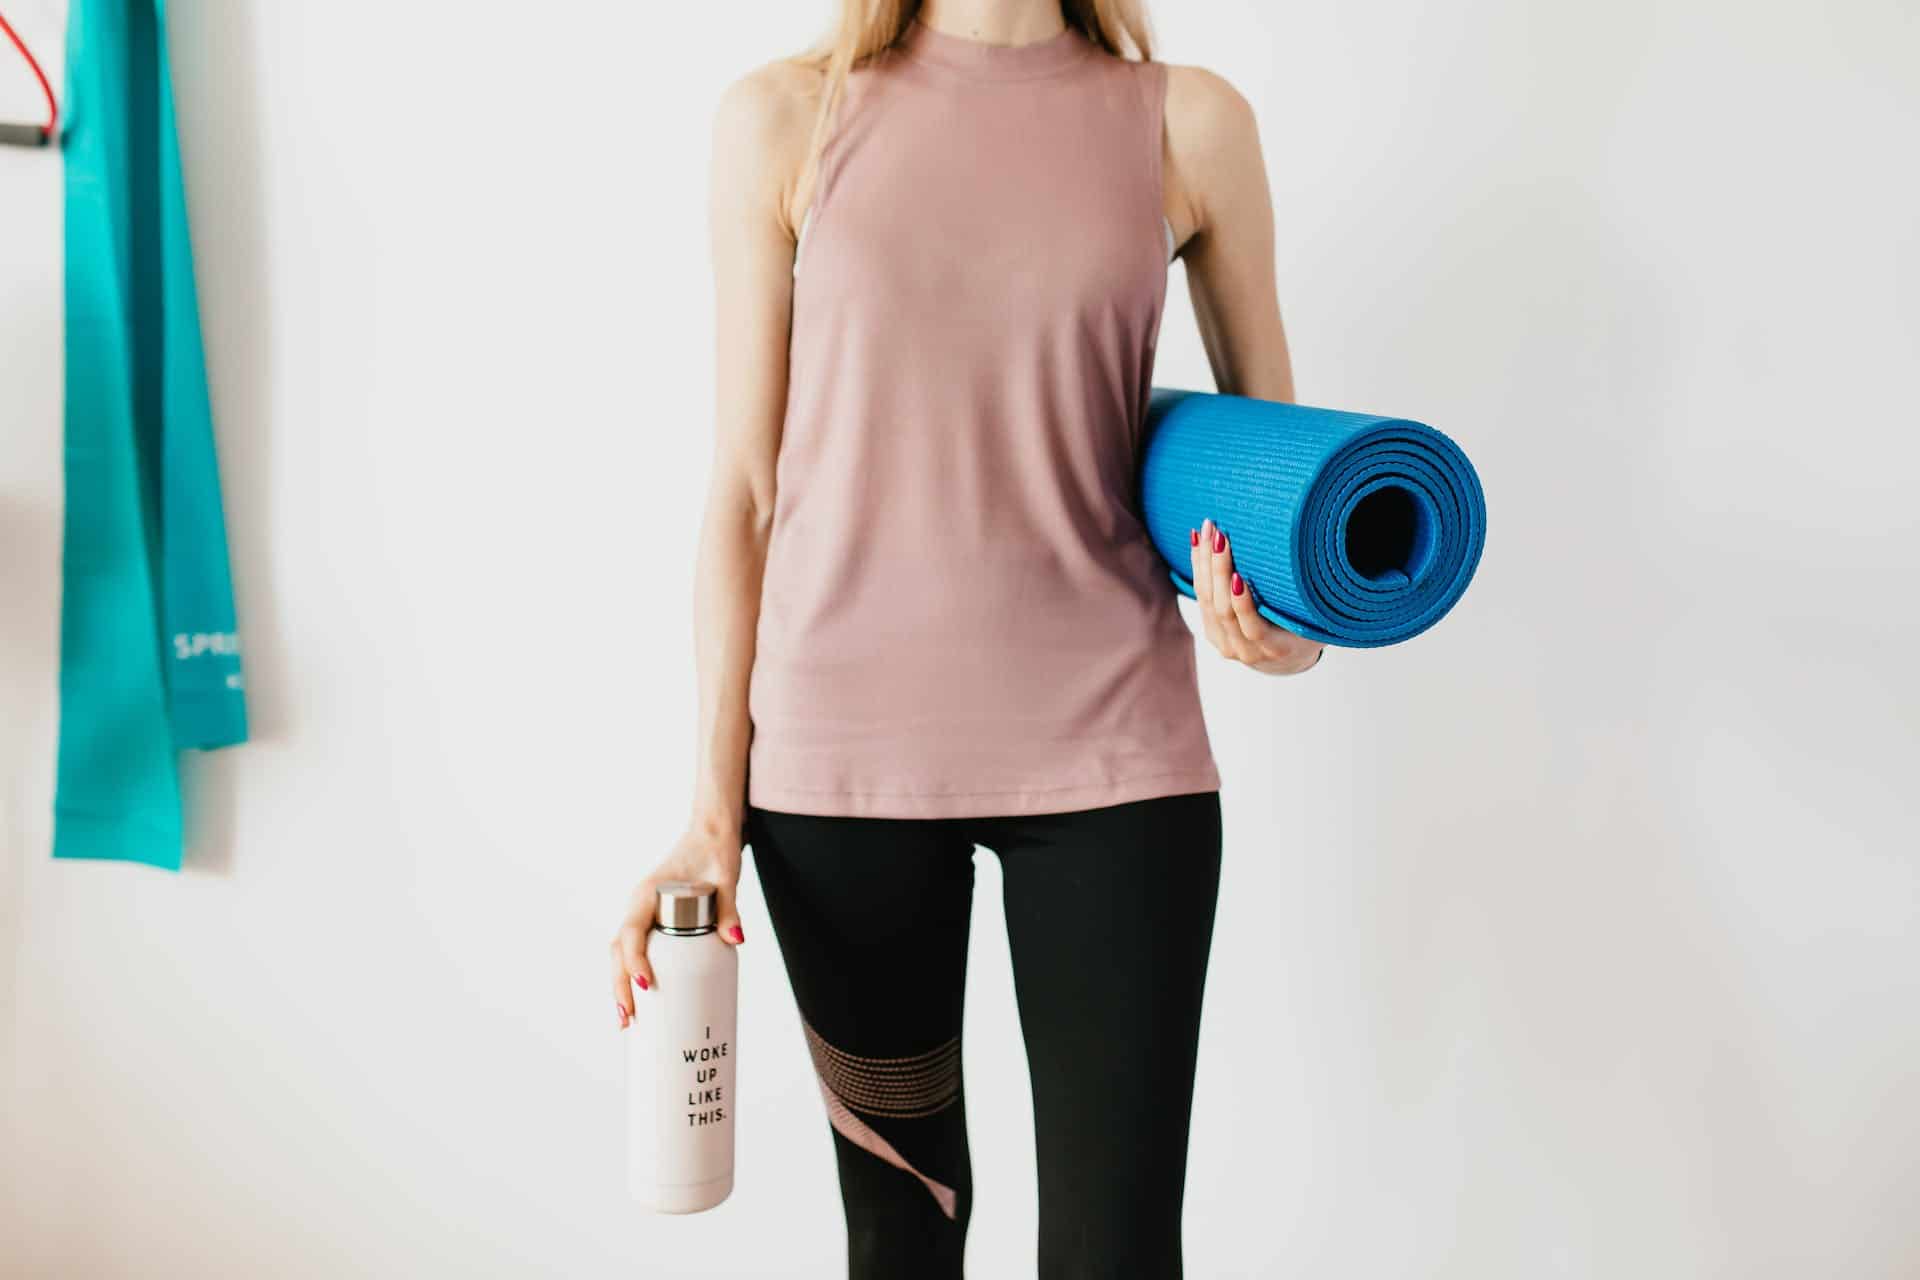 A girl standing with gym accessories